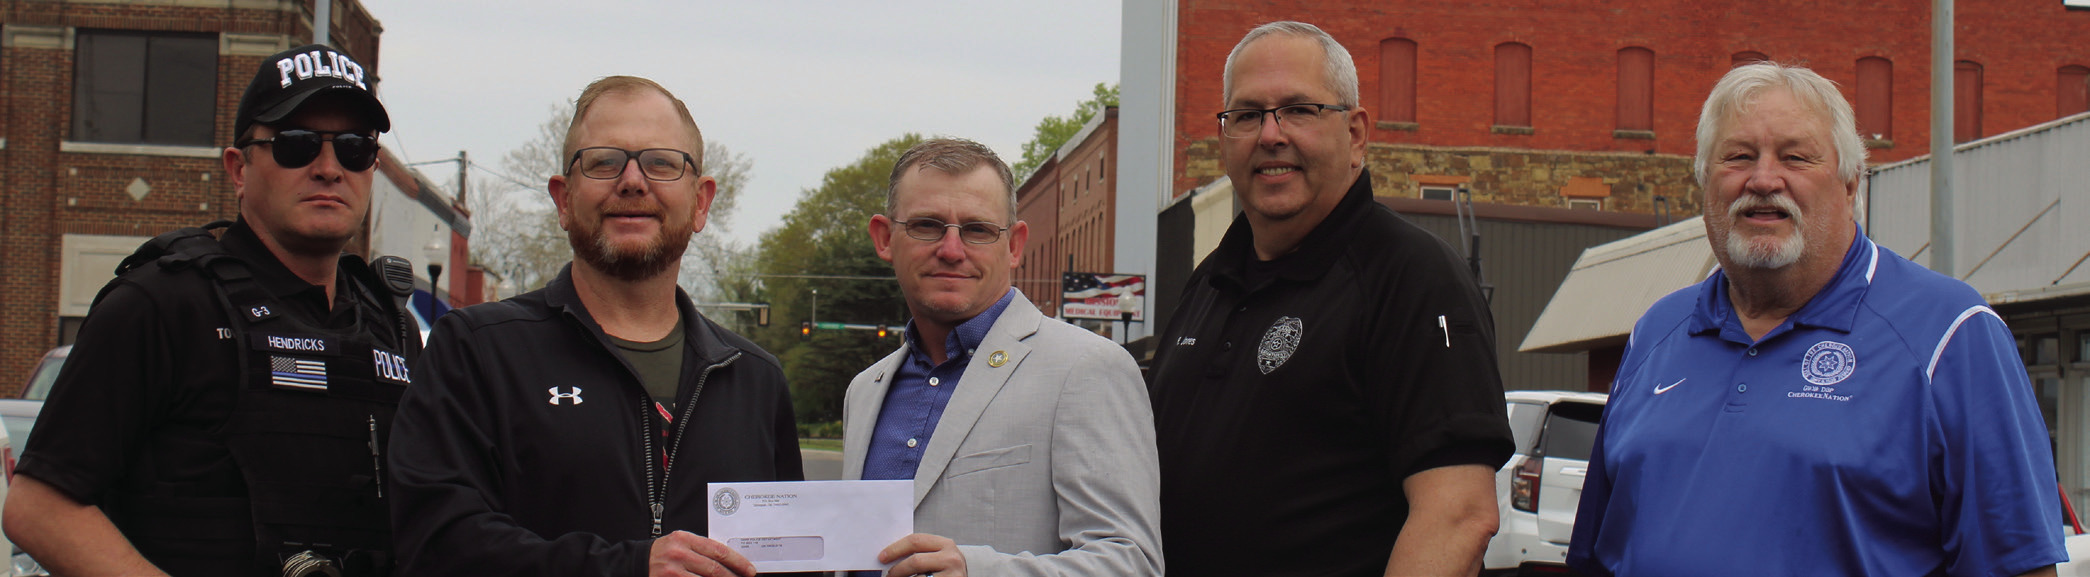 Gans Mayor Gary McGinnis (center), Gans Police Officer Mike Hendricks (left) and Assistant Police Chief Robert Jones receive their $10,000 check from Cherokee Nation Councilmen Daryl Legg (second from left) and E.O. Smith Jr. (right).